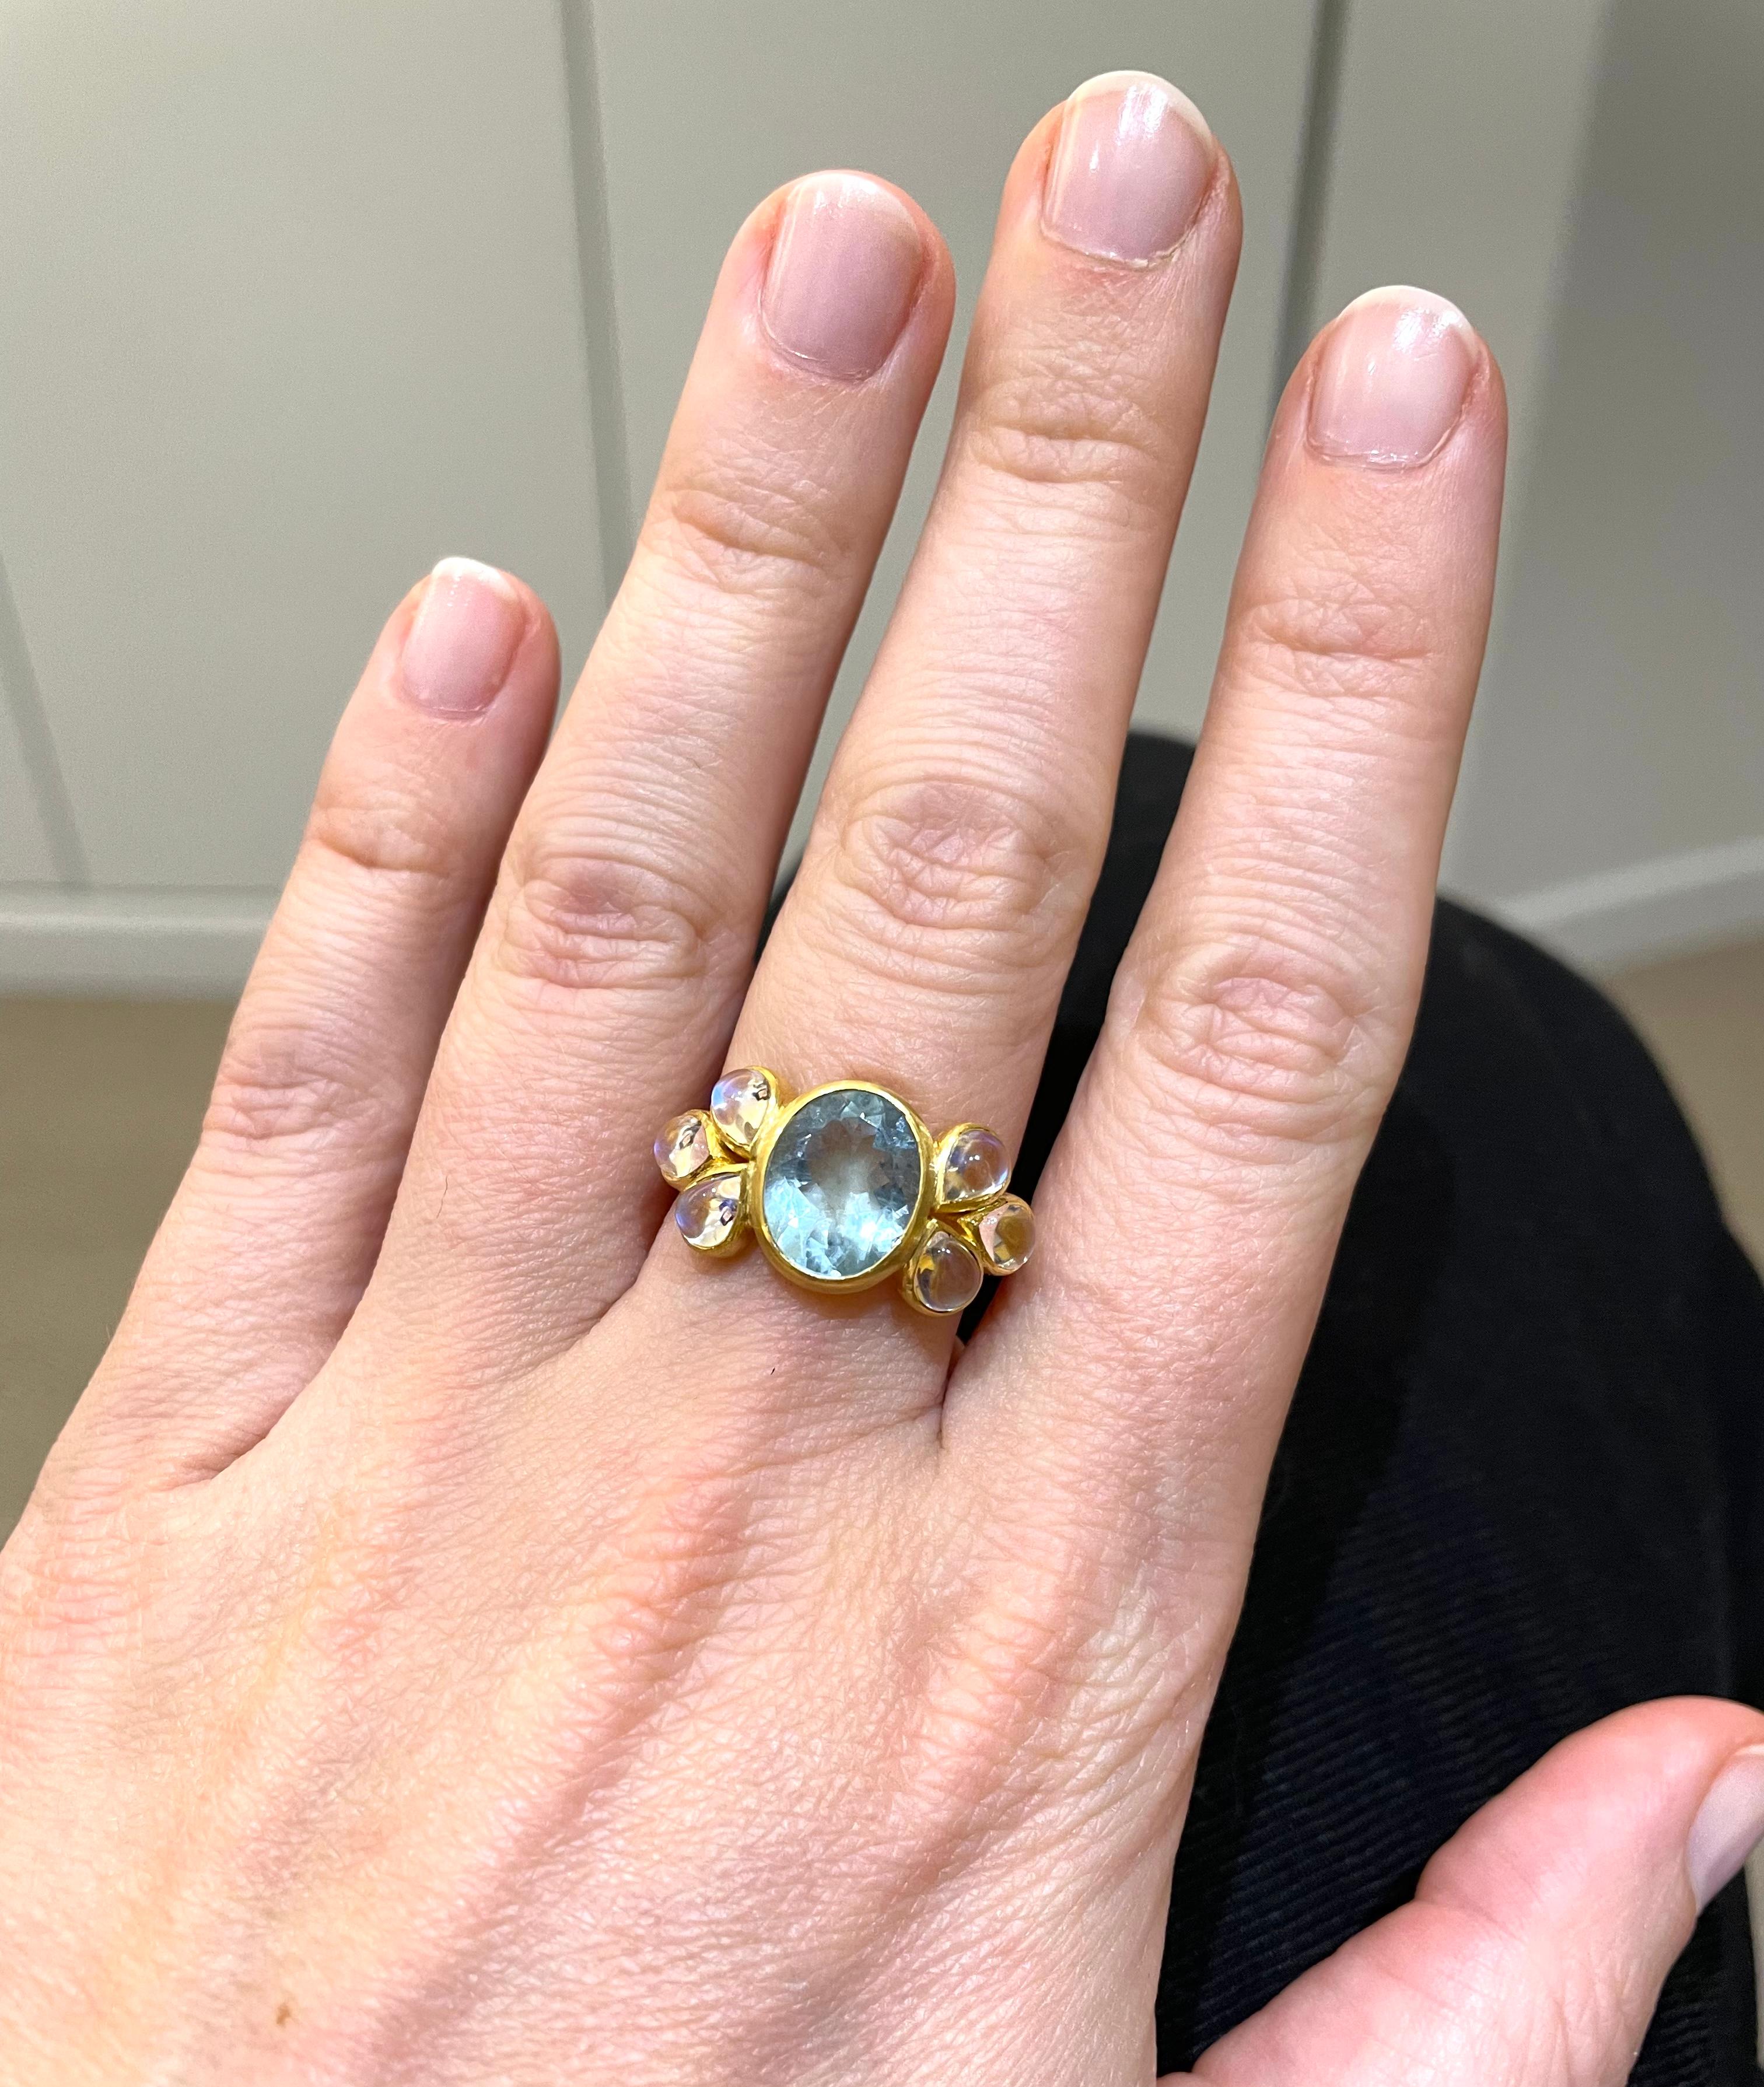 This delicate ring is composed of an intense aquamarine of 2,86 carats surrounded on the left and on the right side by 3 moonstones cabochons (total weight: 2.22cts). This ring reflects a lot of sparkles and light. Its rounded shape fits well on the